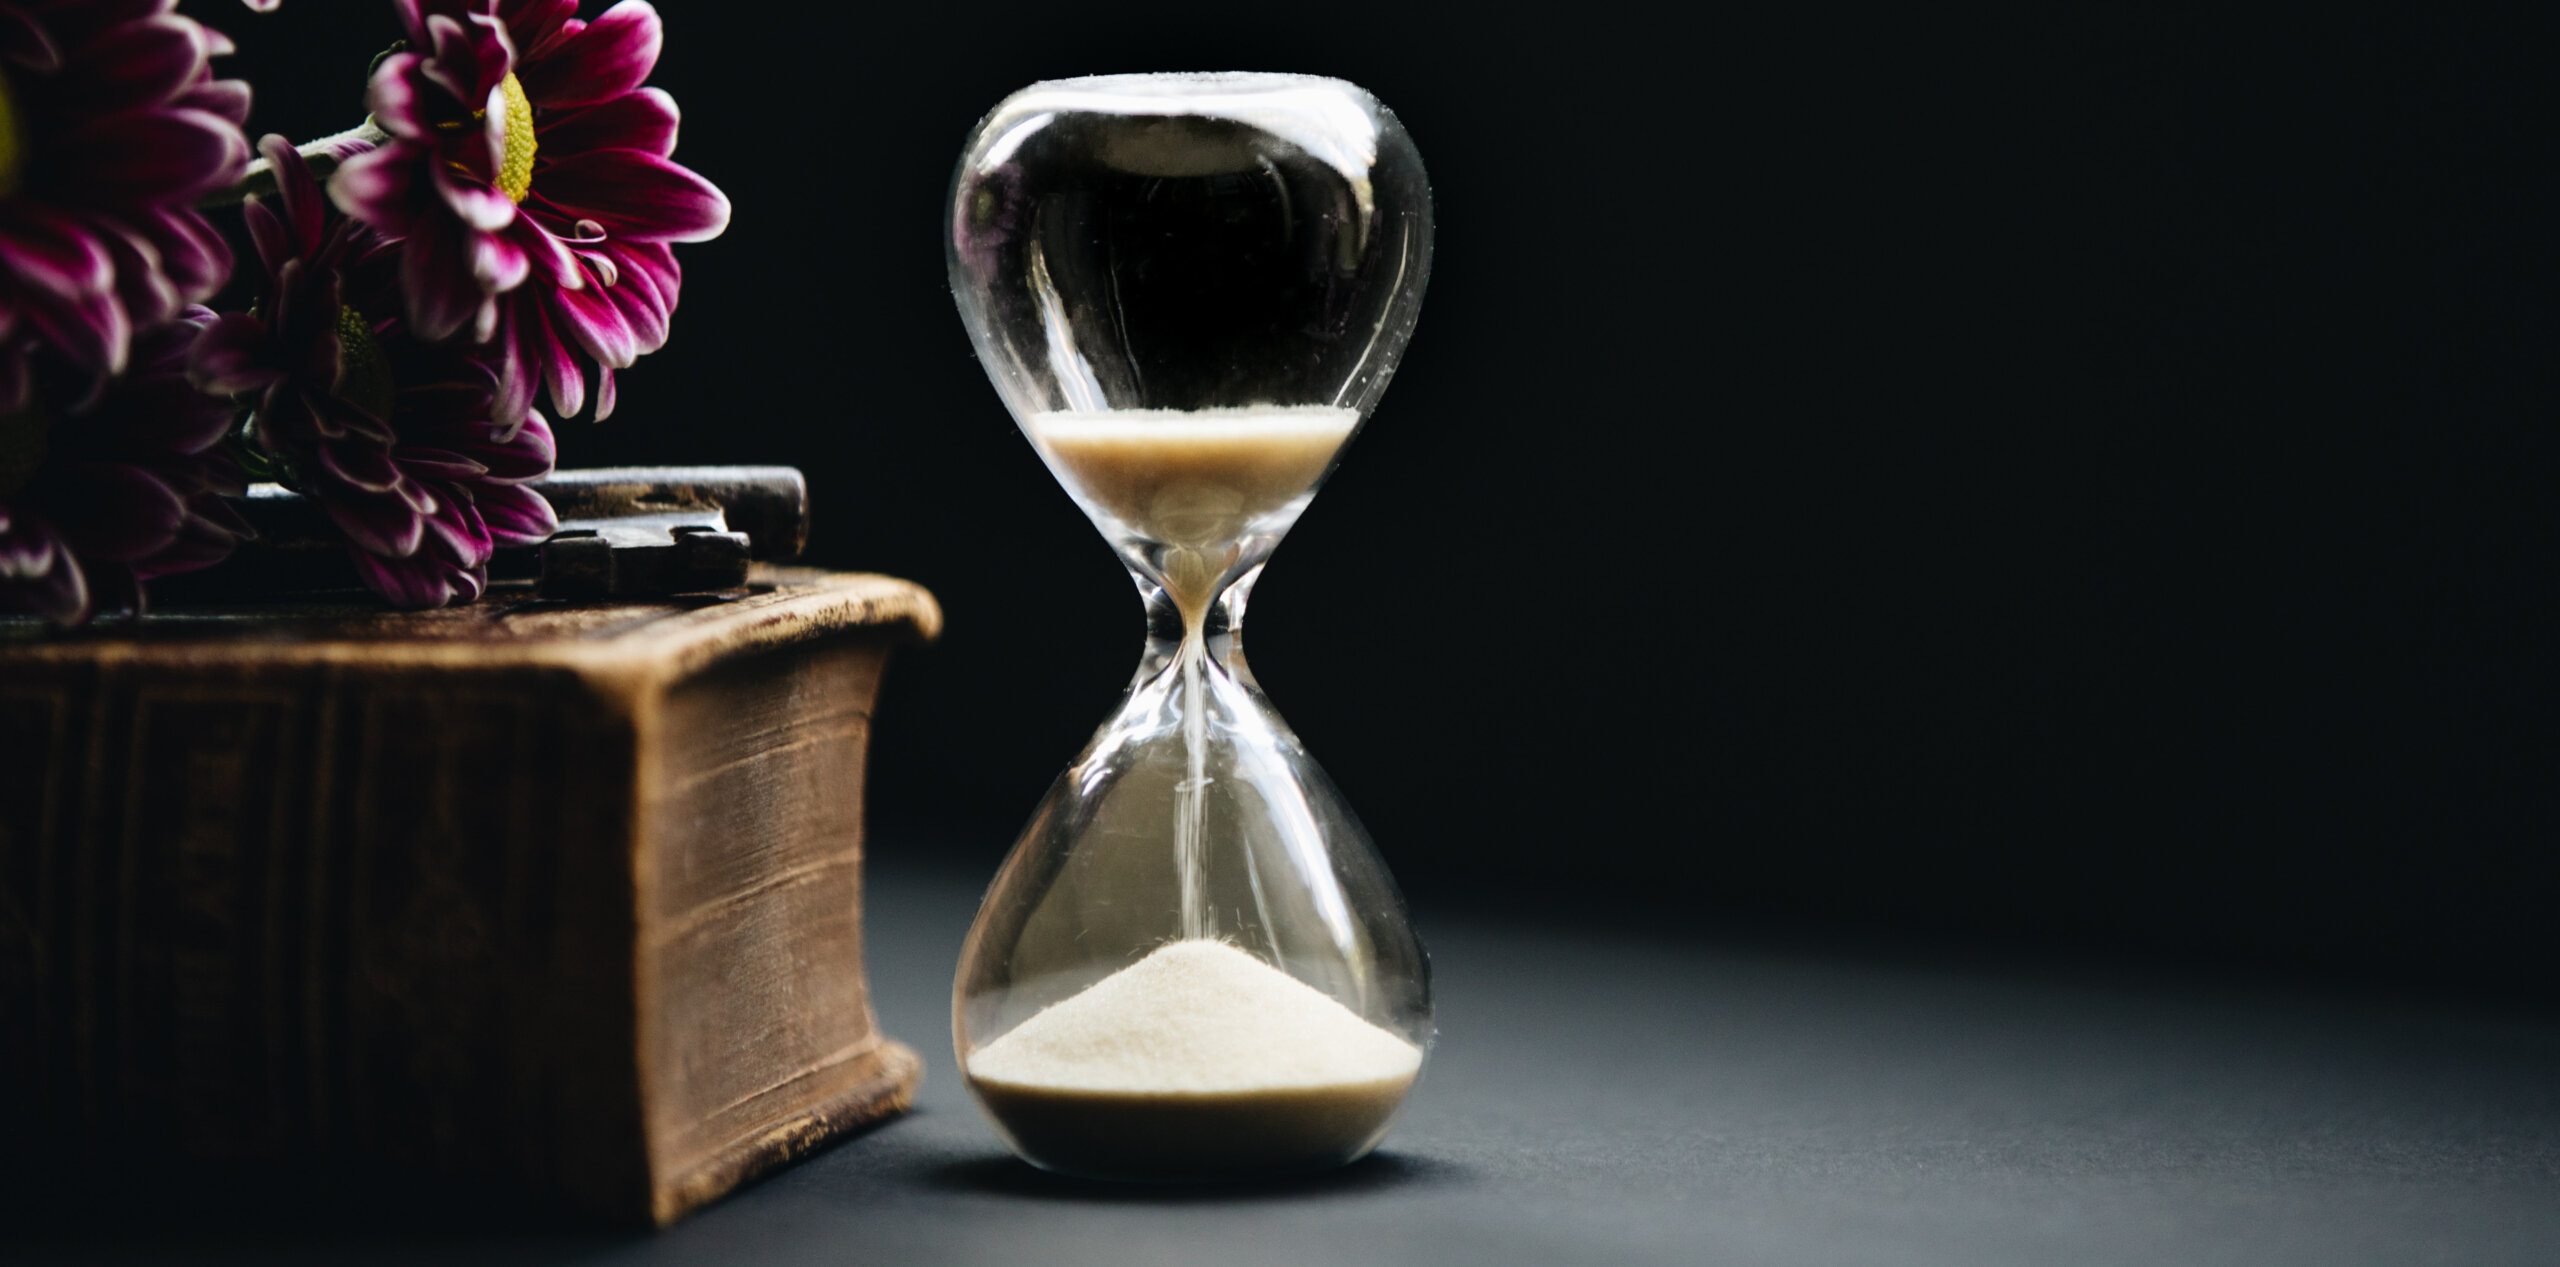 How to Redeem Lost Time With St. Teresa of Avila